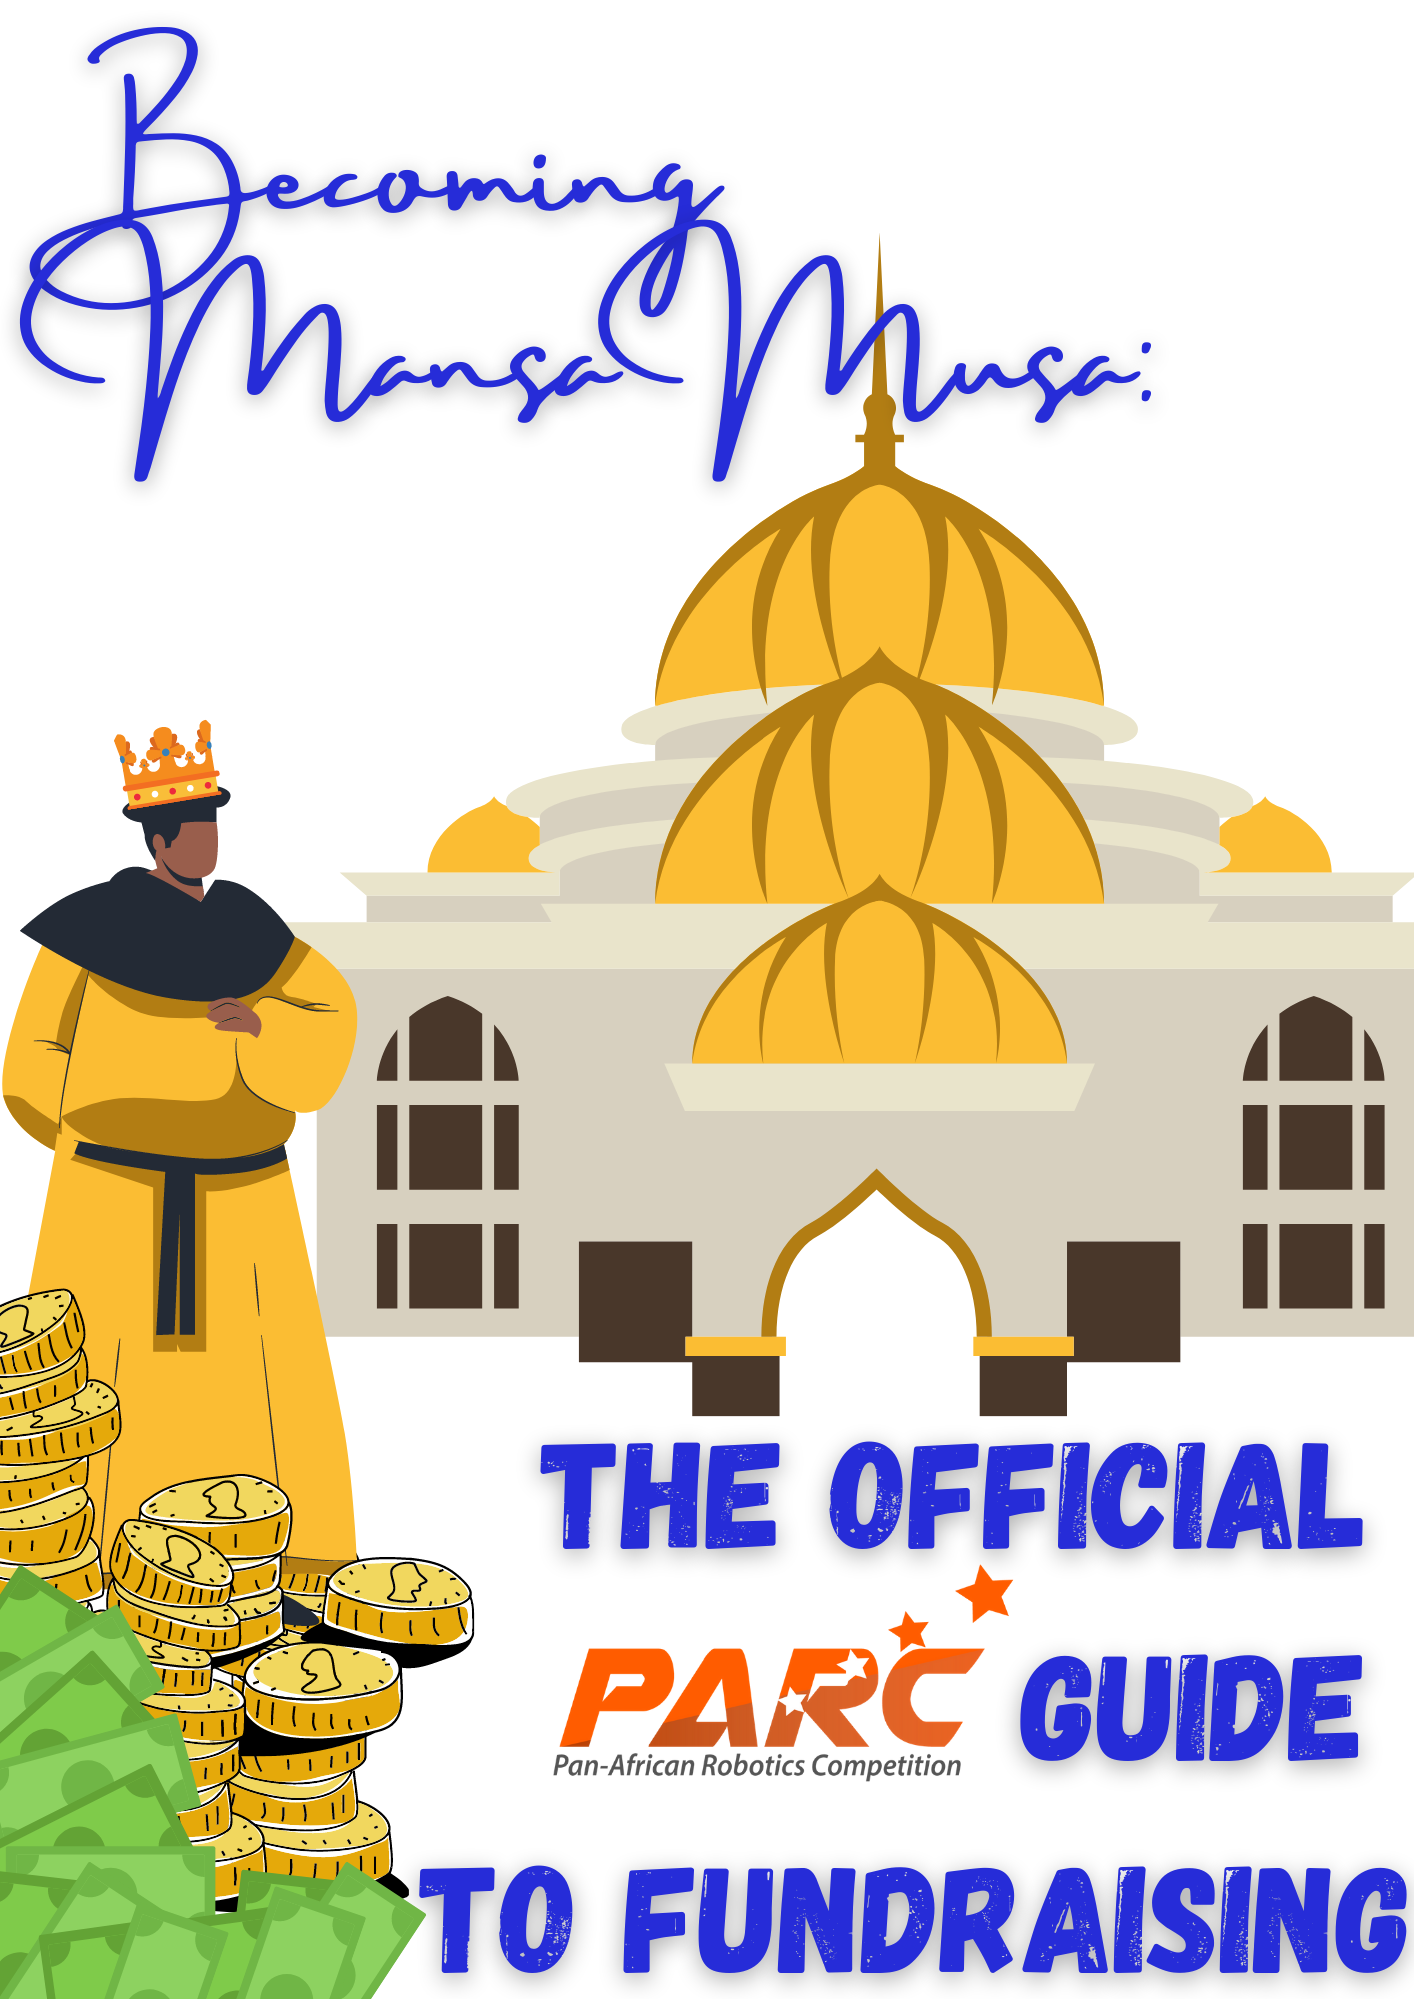 Becoming Mansa Musa - The PARC Guide to Fundraising